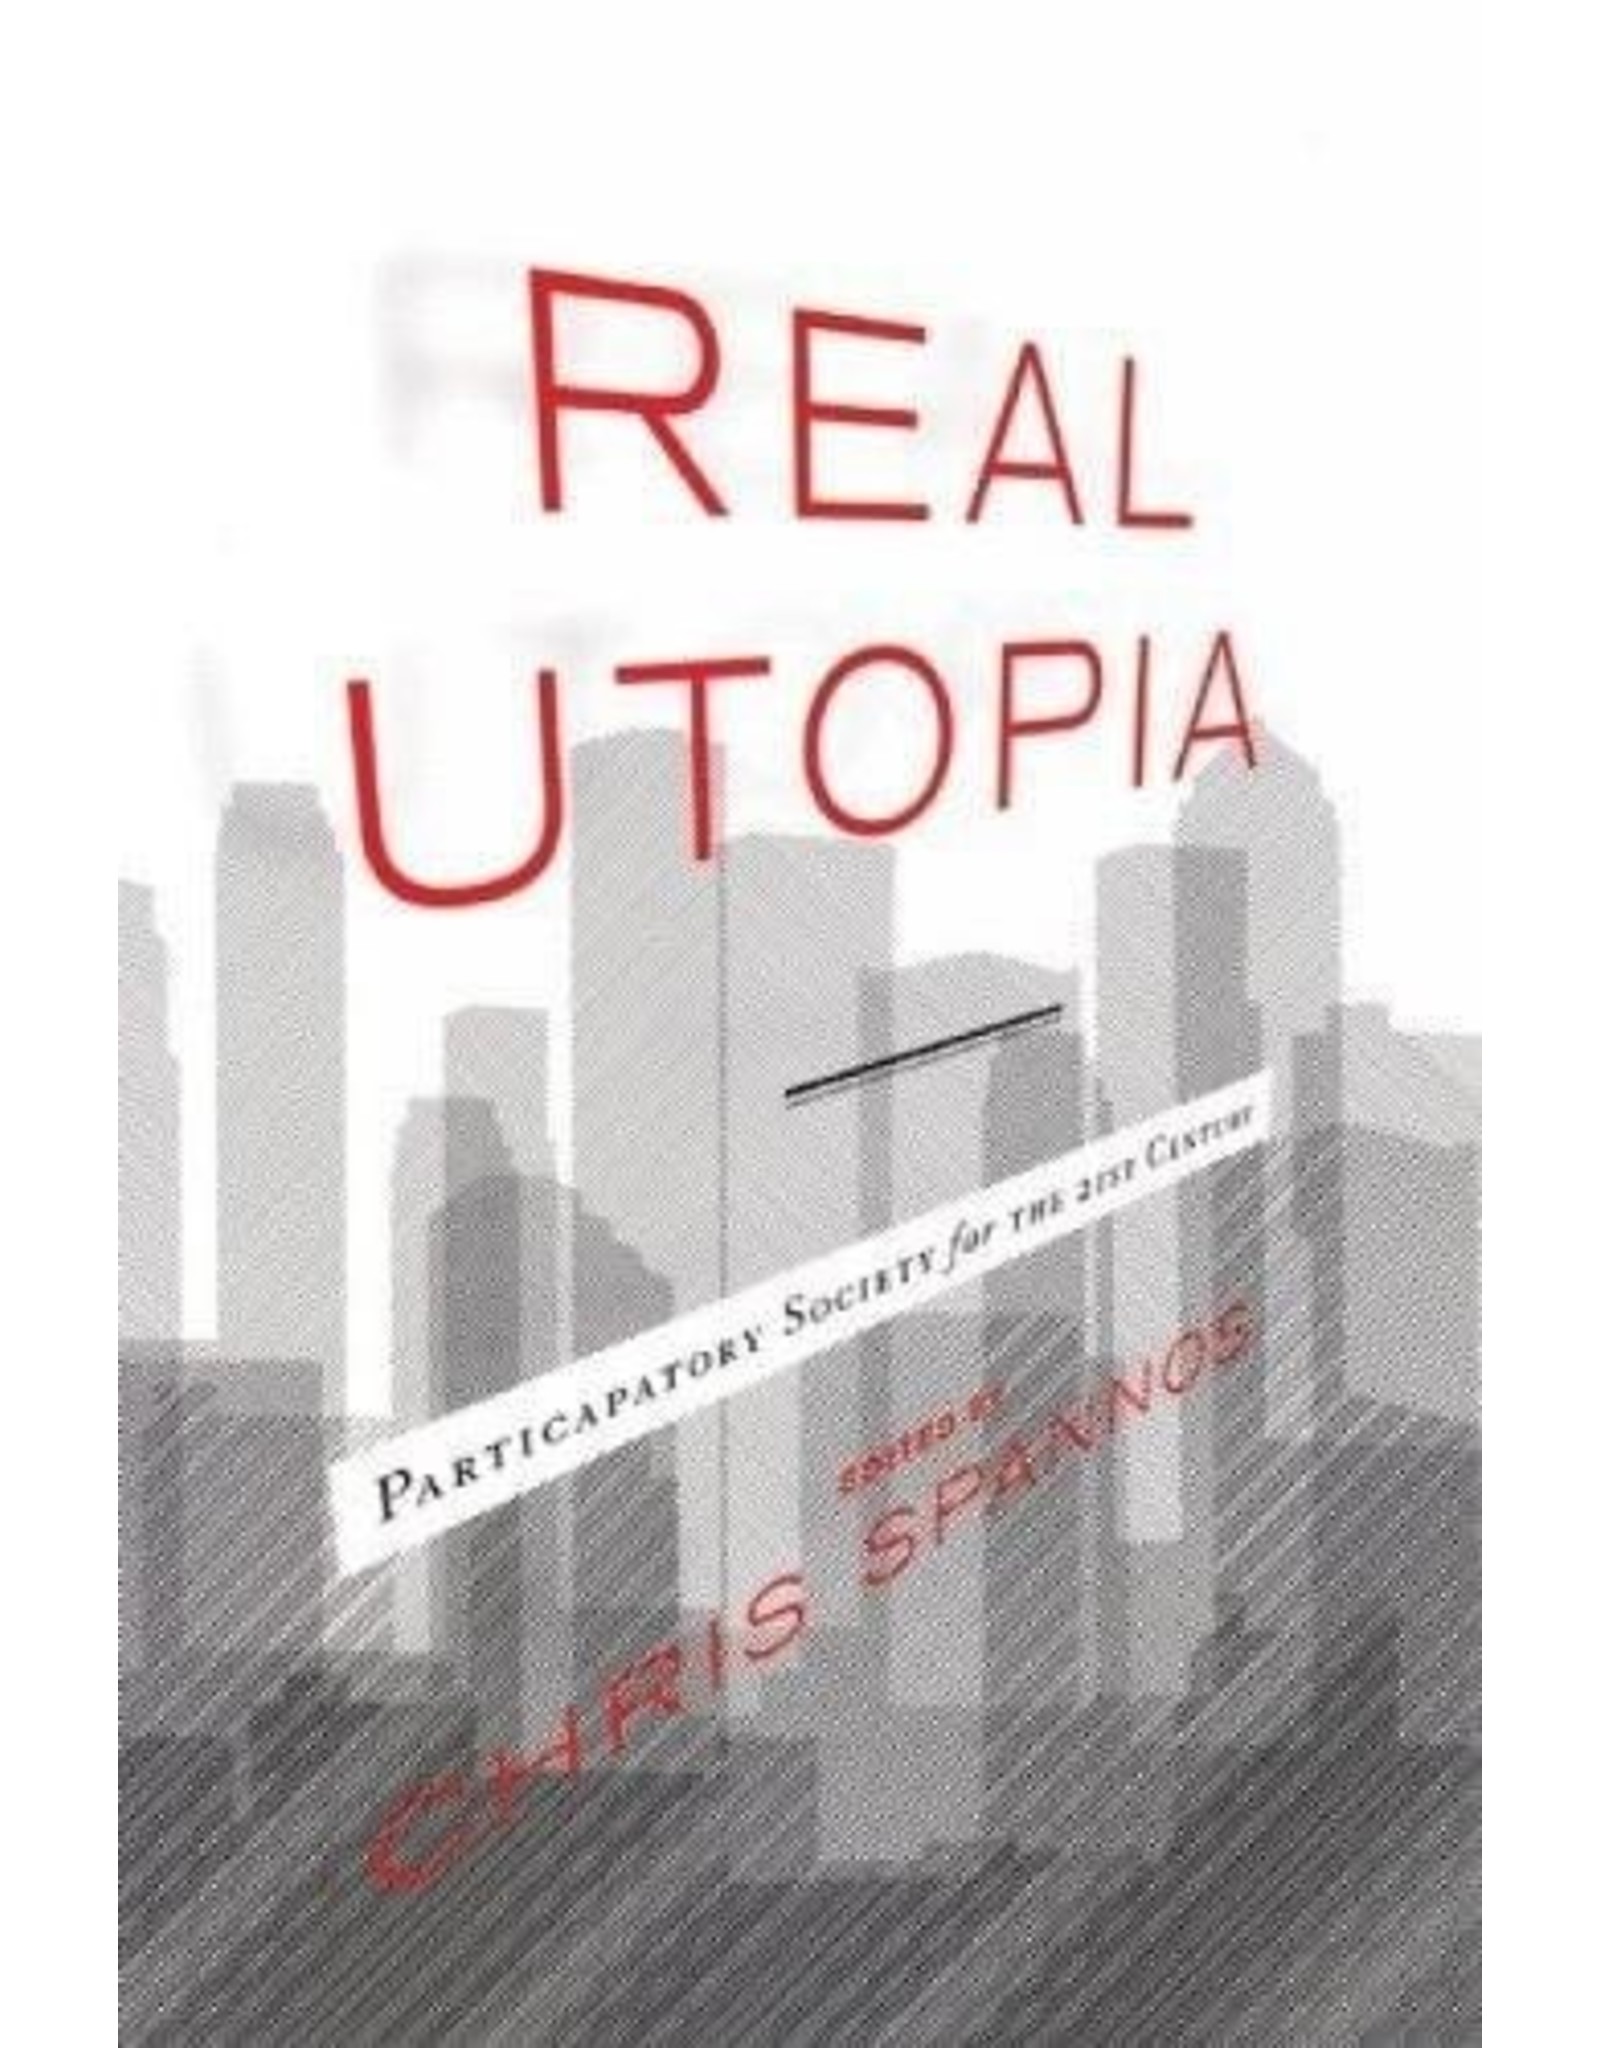 Literature Real Utopia: Participatory Society for the 21st Century